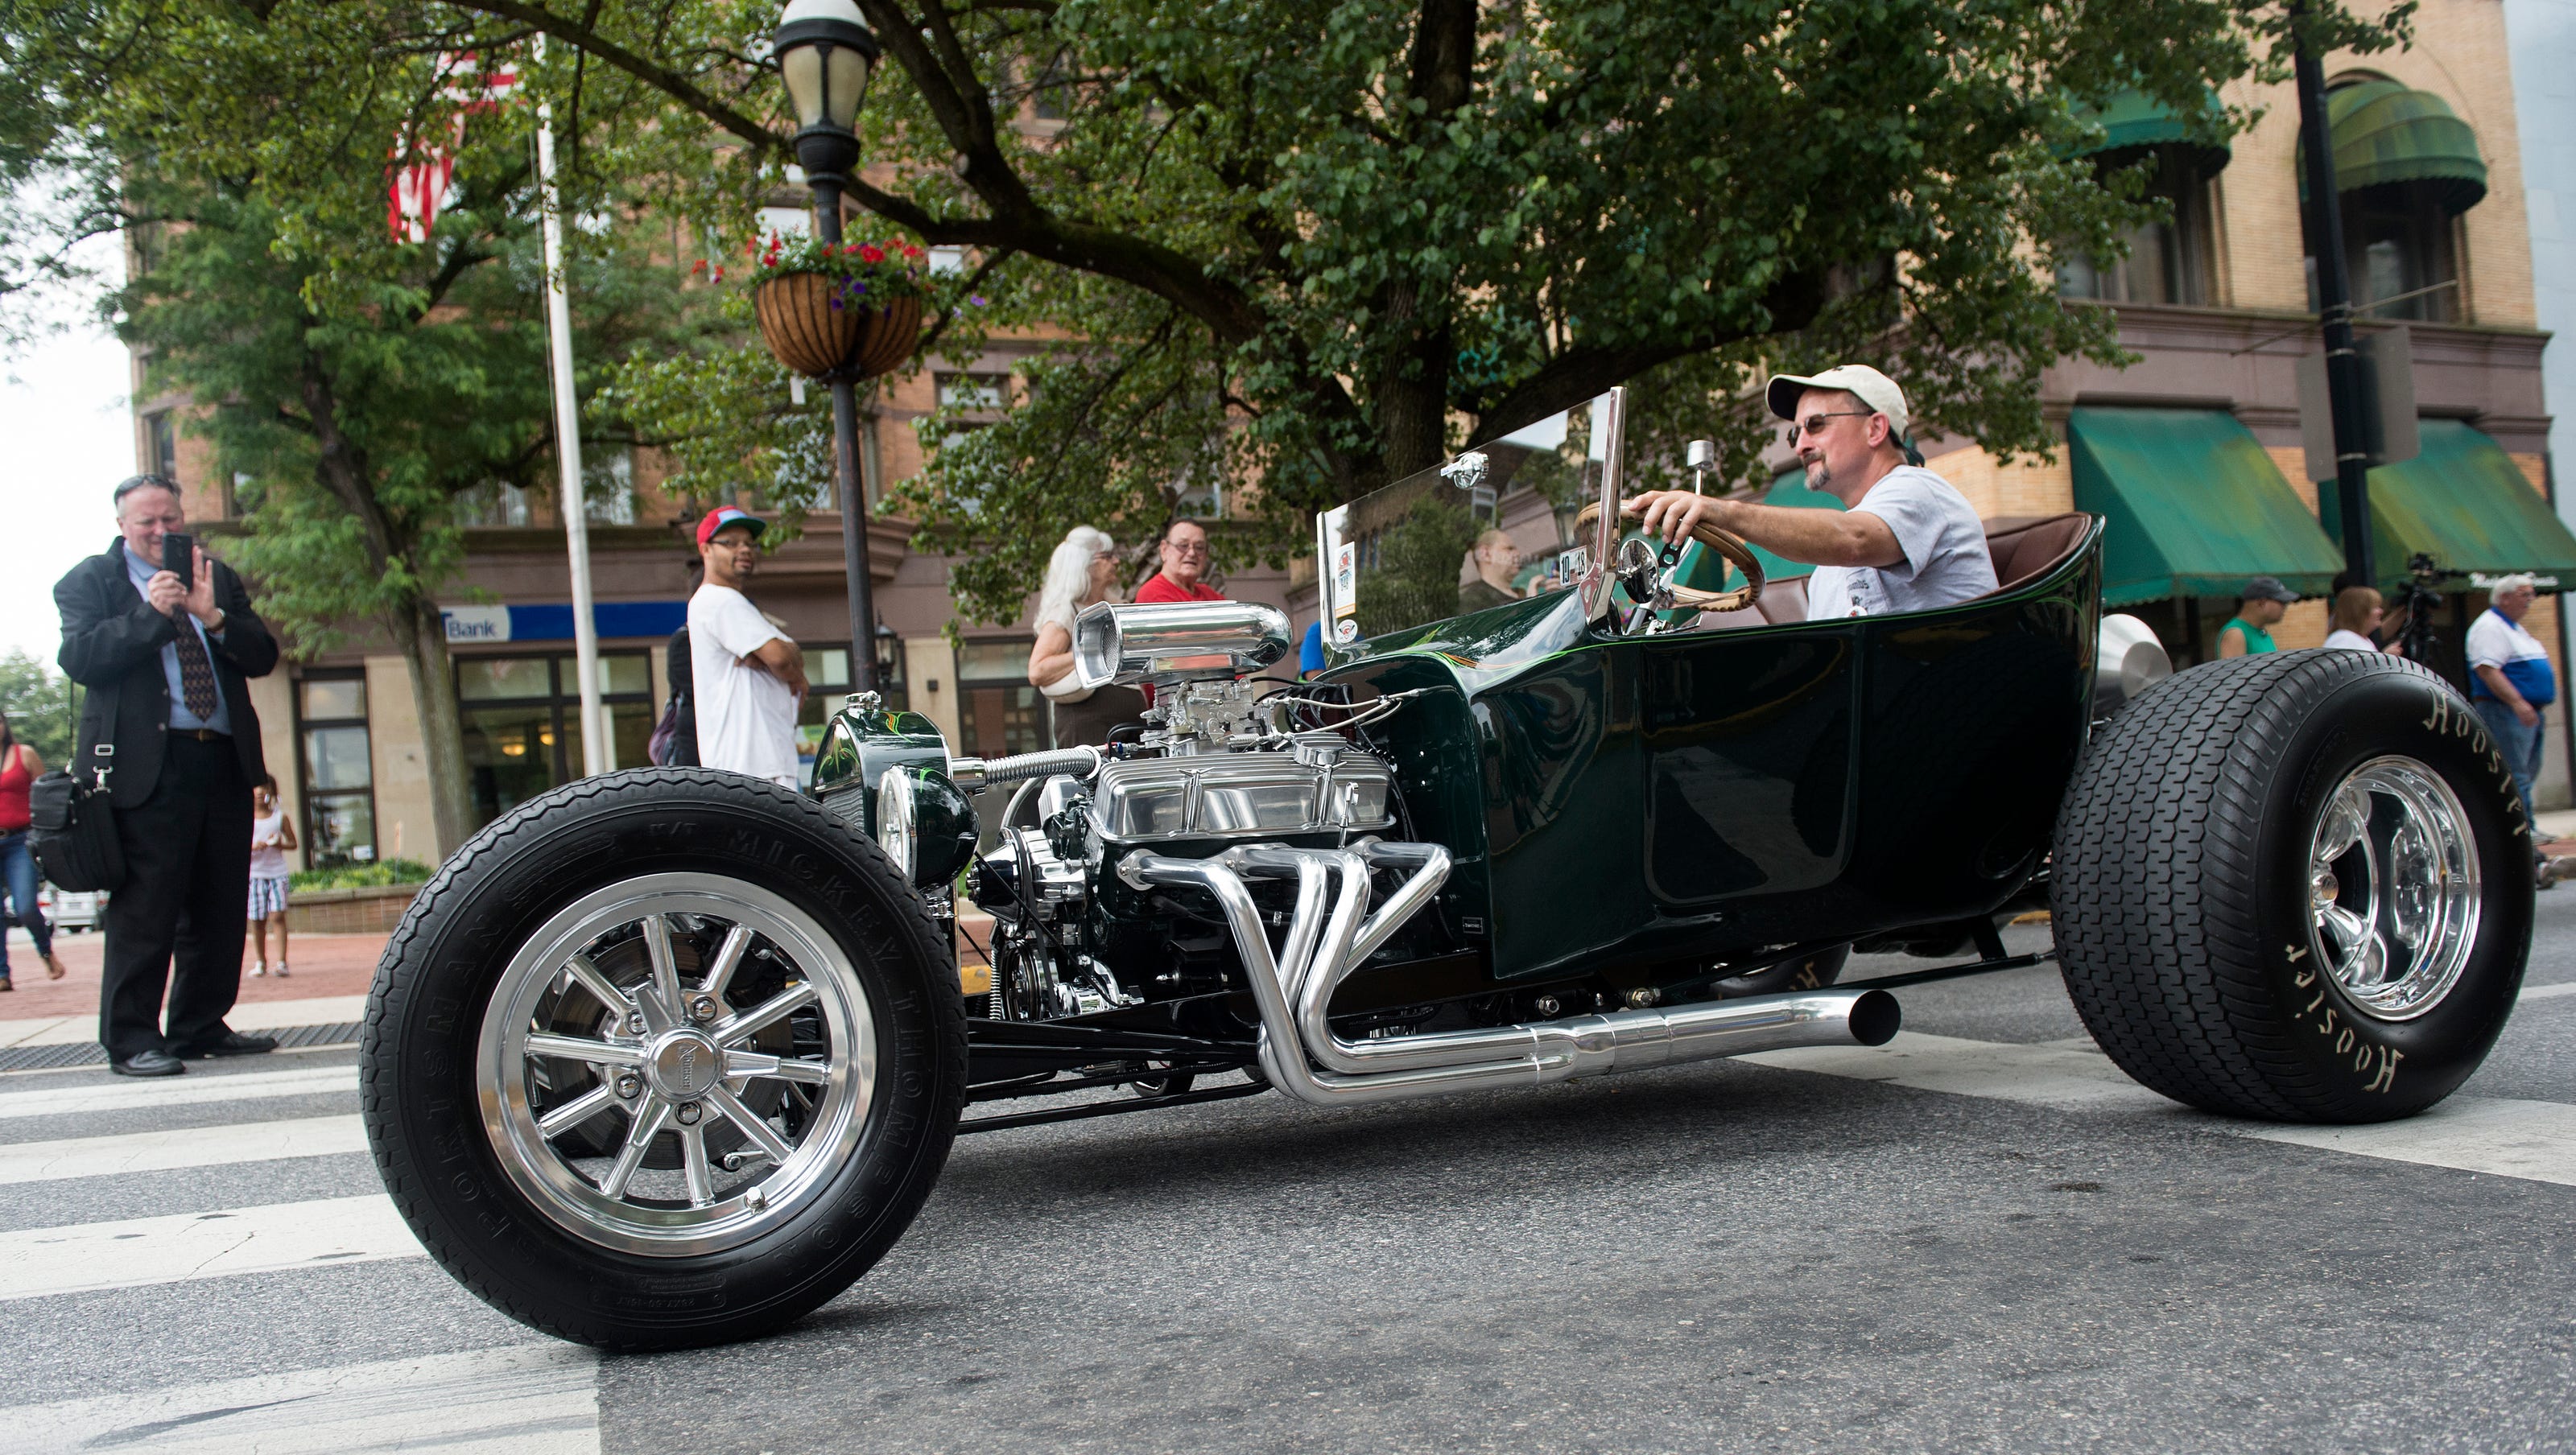   
																The street rods are back in York: Parade video and photos, car show details 
															 